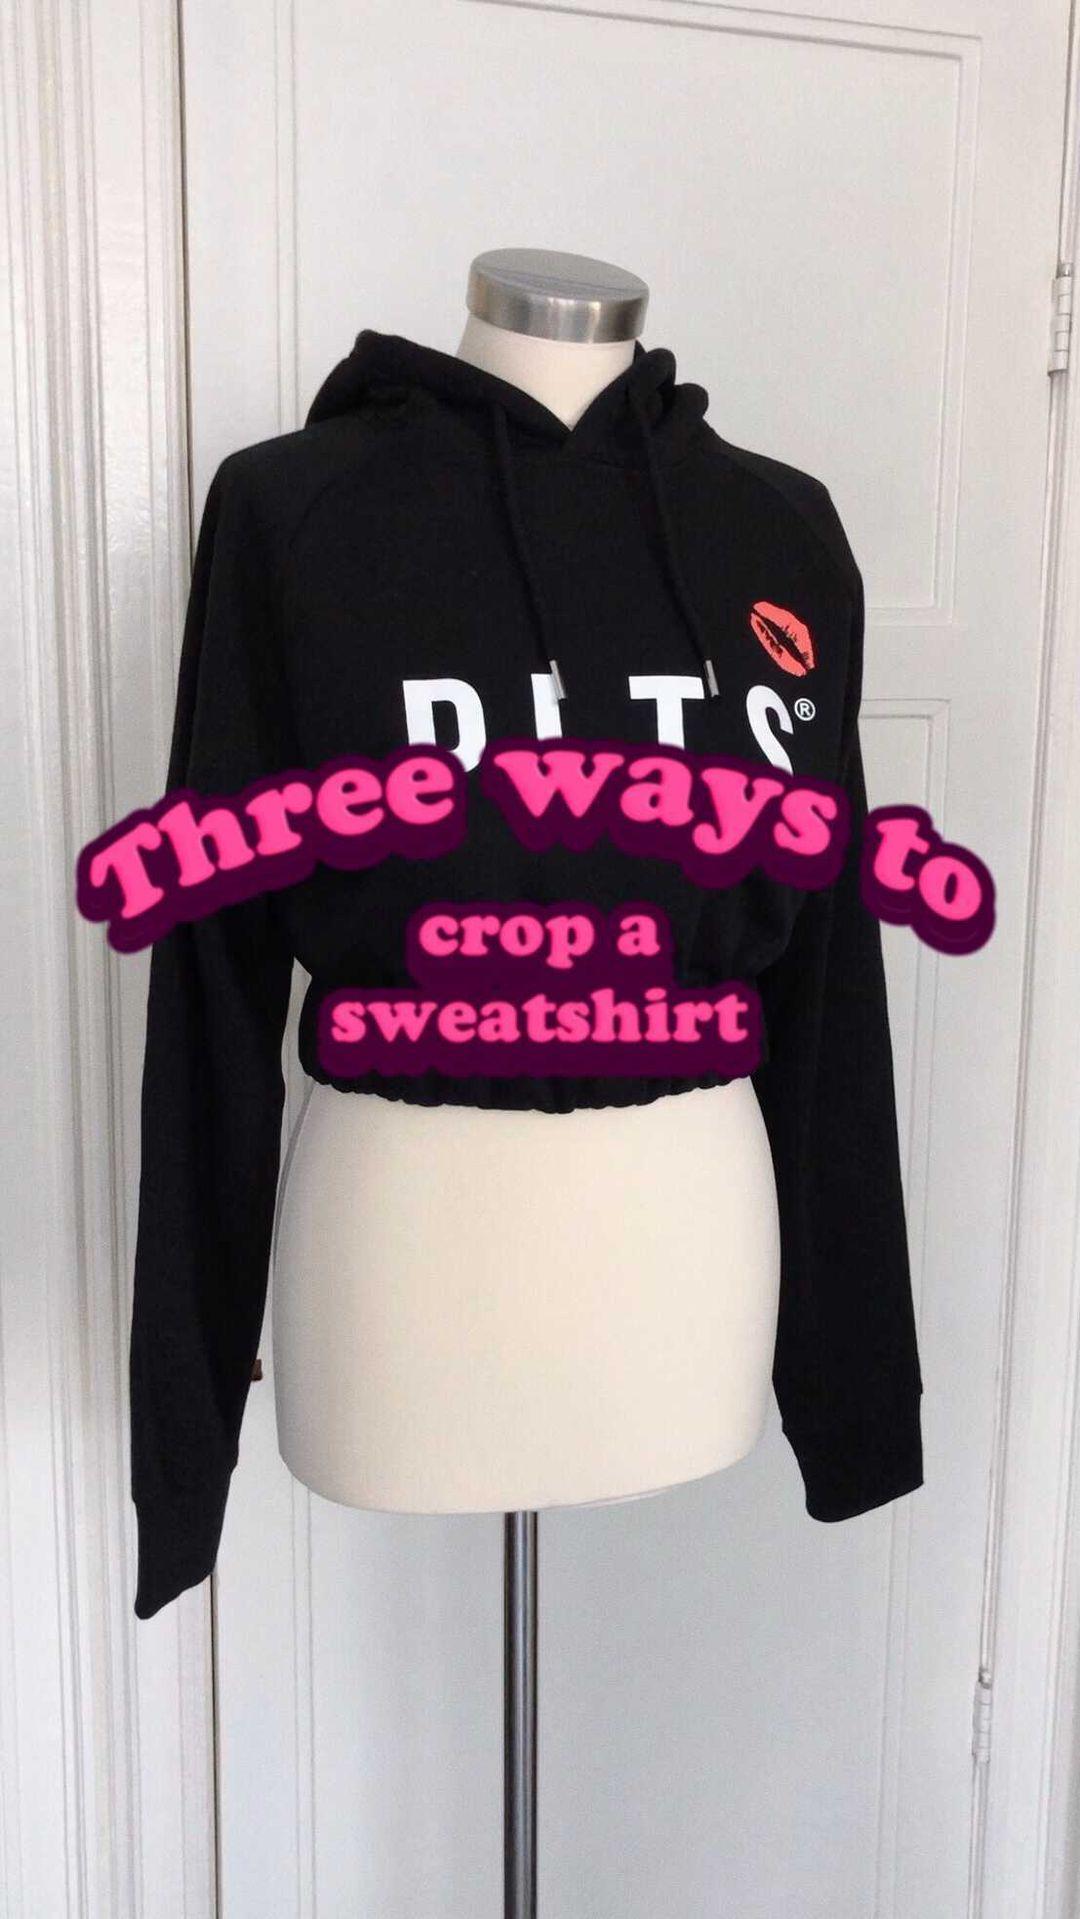 I always get asked if my cropped hoodies/sweatshirts came like that or if I cut them myself so for this new DIY, I wanted to use my @plts_studios hoodies and share with you three different techniques to do it. Some are easier than others but they are all super doable. I just think cropped is sexier, what do you think? Also let me know which one was your favorite? 1,2 or 3? &amp; if you also want one of these, make sure to shop the PLTS merch on their website! 🥊 #diy #howto #pltstyle